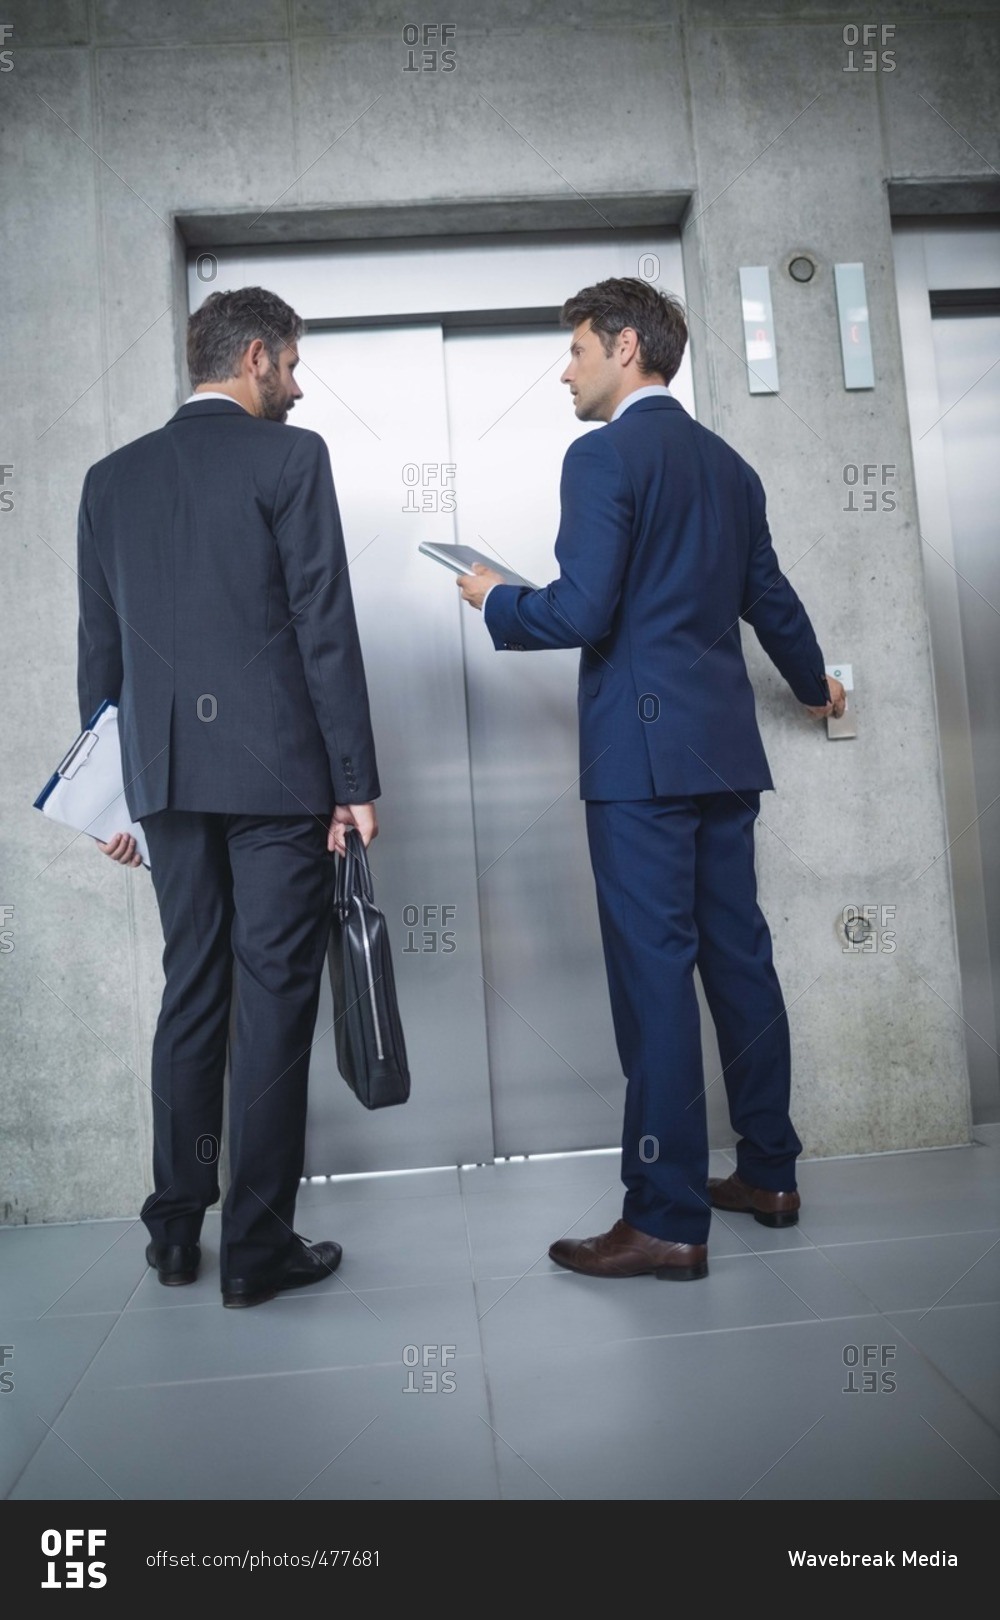 Businessmen standing by lift and pressing button in office